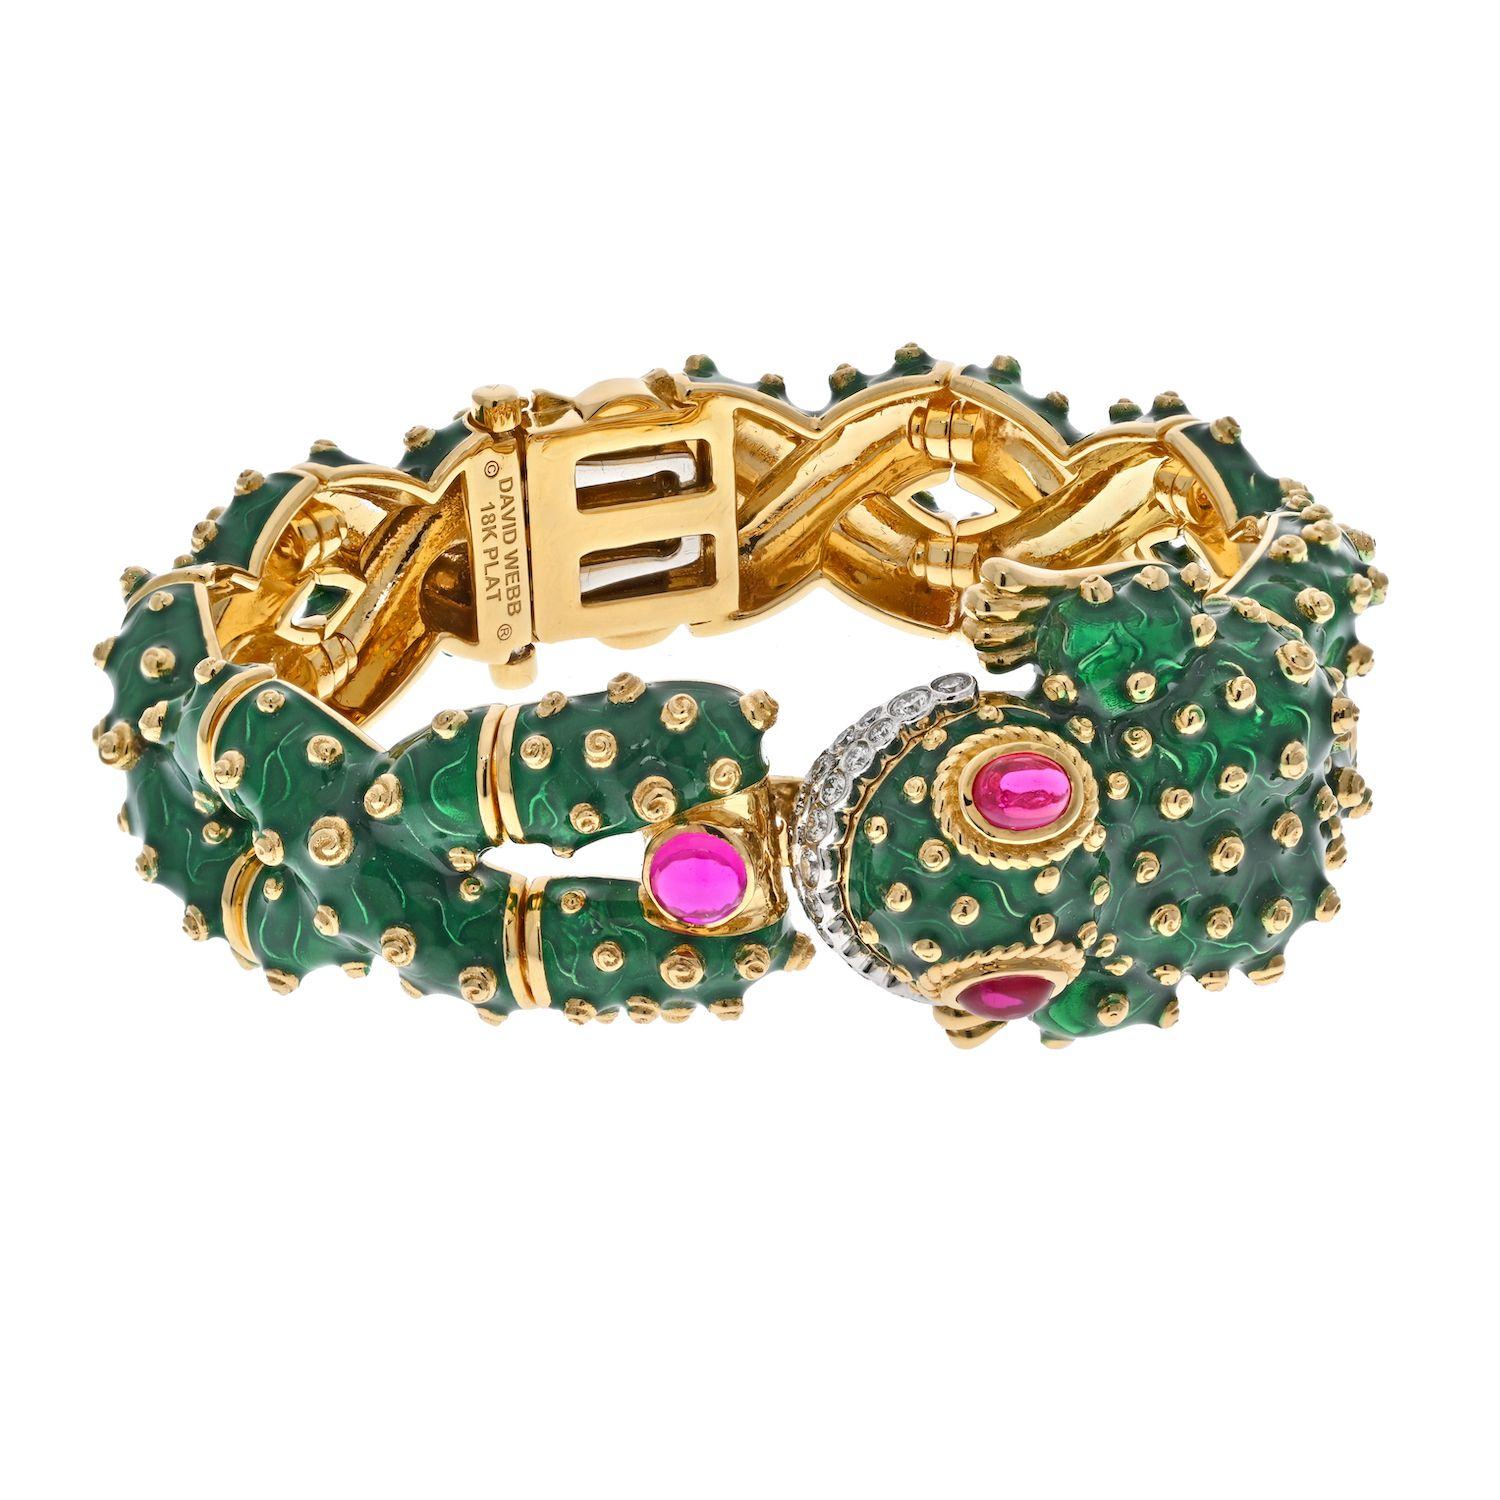 This gorgeous David Webb Frog bracelet is amazing and for a smaller wrist. 
Made in 18 kt., the stylized frog with braided legs applied all over with green enamel, accented throughout with polished spiraled gold balls, with oval cabochon ruby eyes,